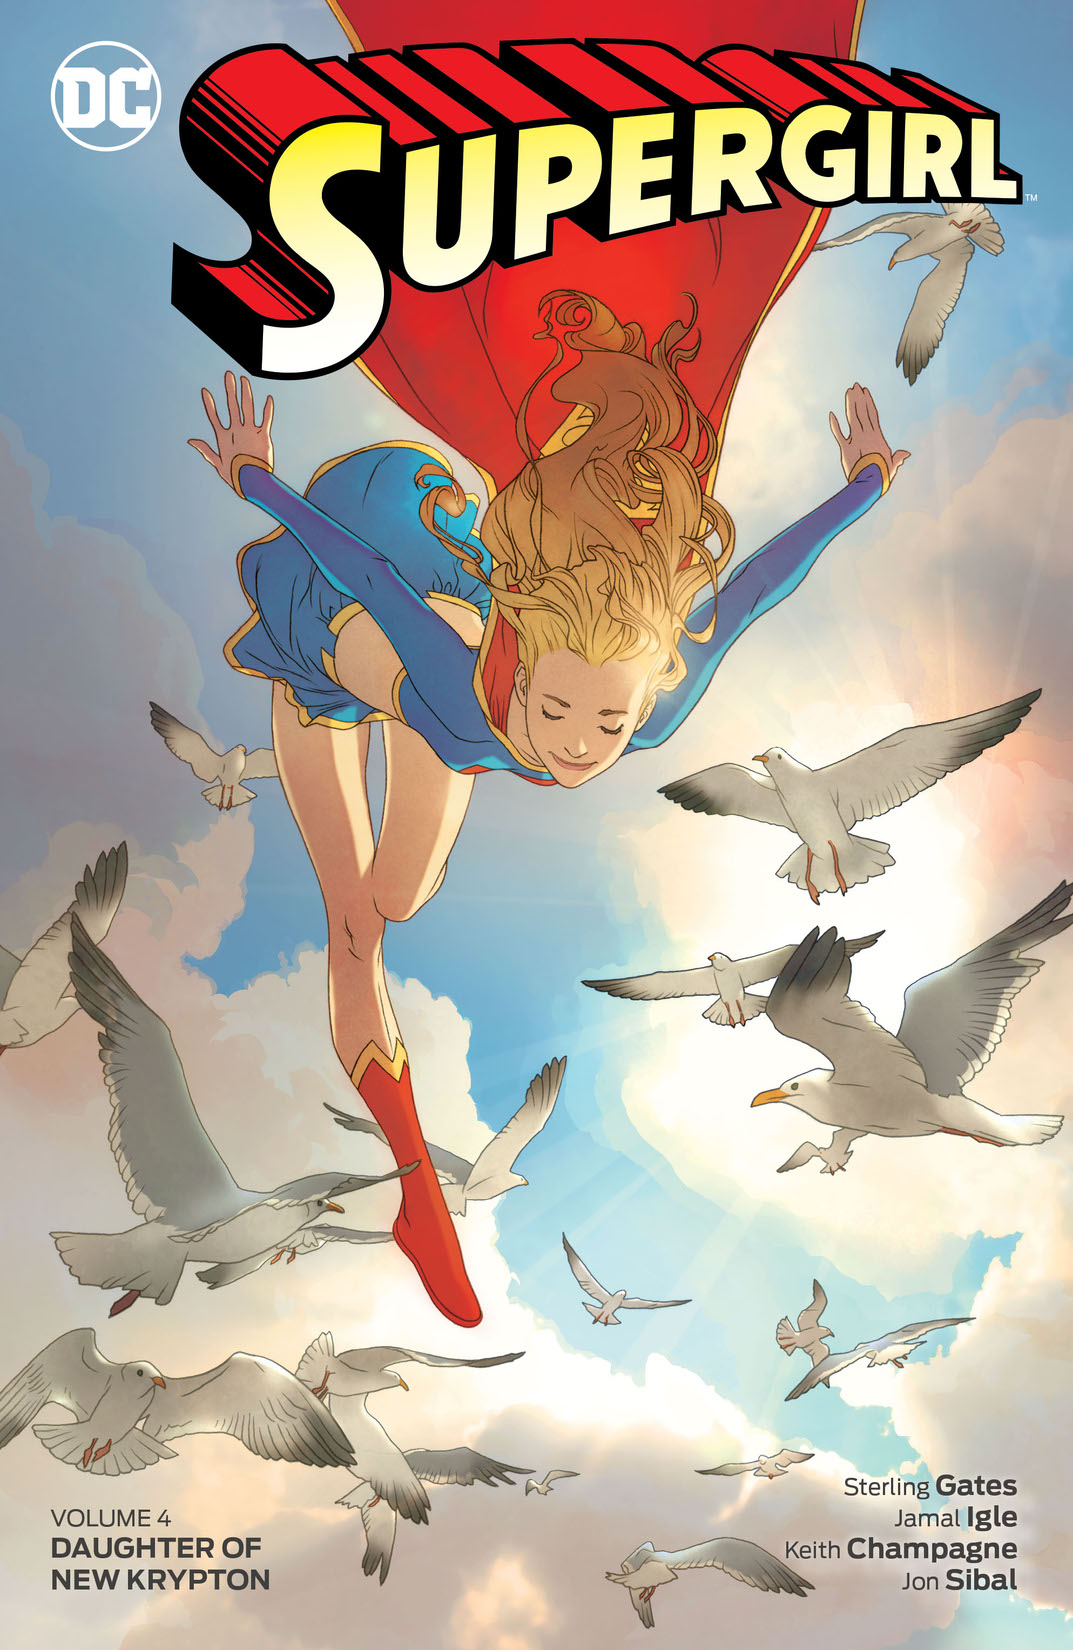 Supergirl Vol. 4: Daughter of New Krypton (2000s Series) preview images